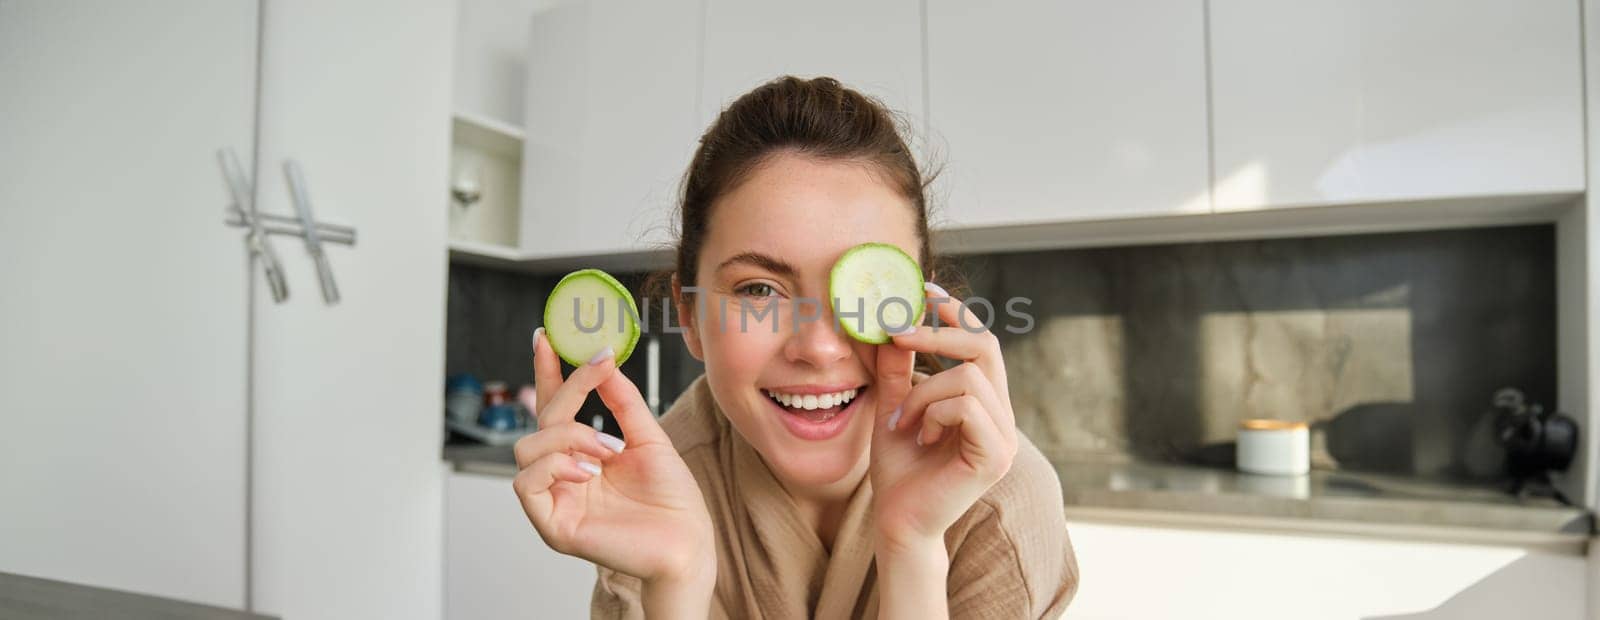 Funny, happy girl eating healthy, holding zucchini, chopping vegetables for healthy meal in the kitchen, posing in bathrobe.